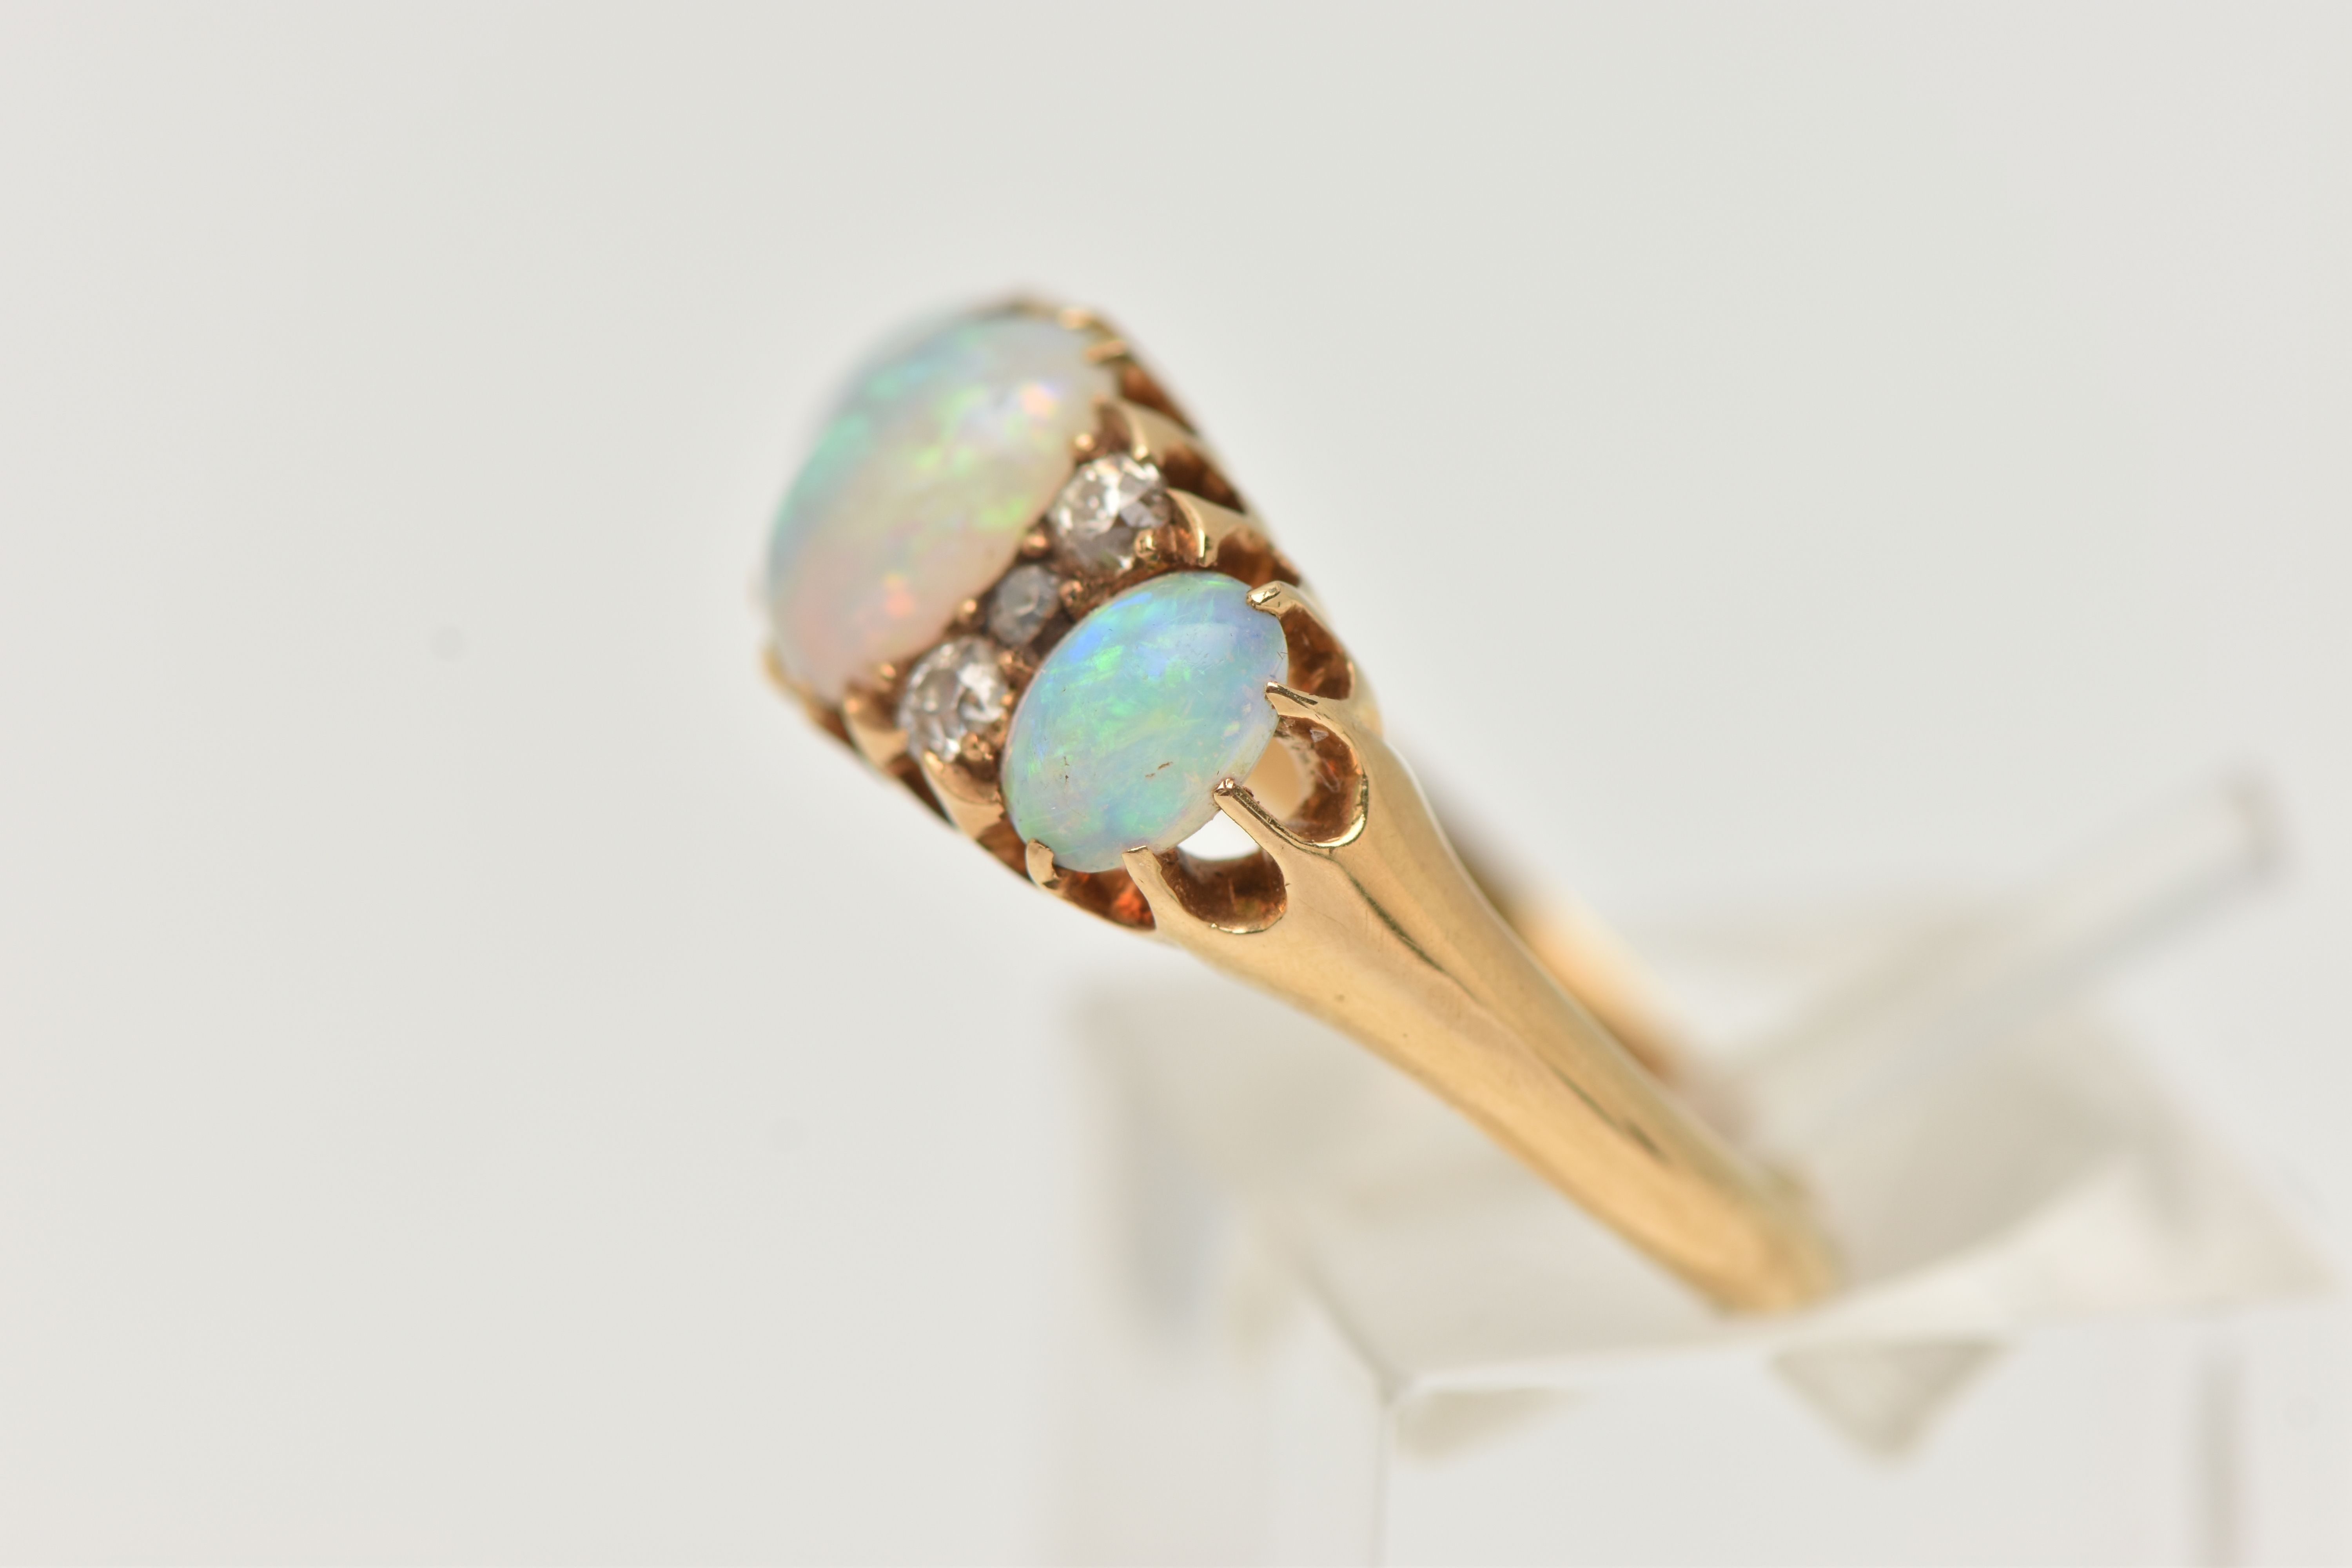 AN EARLY 20TH CENTURY OPAL AND DIAMOND RING, three oval cabochon opals prong set in yellow metal, - Image 2 of 4